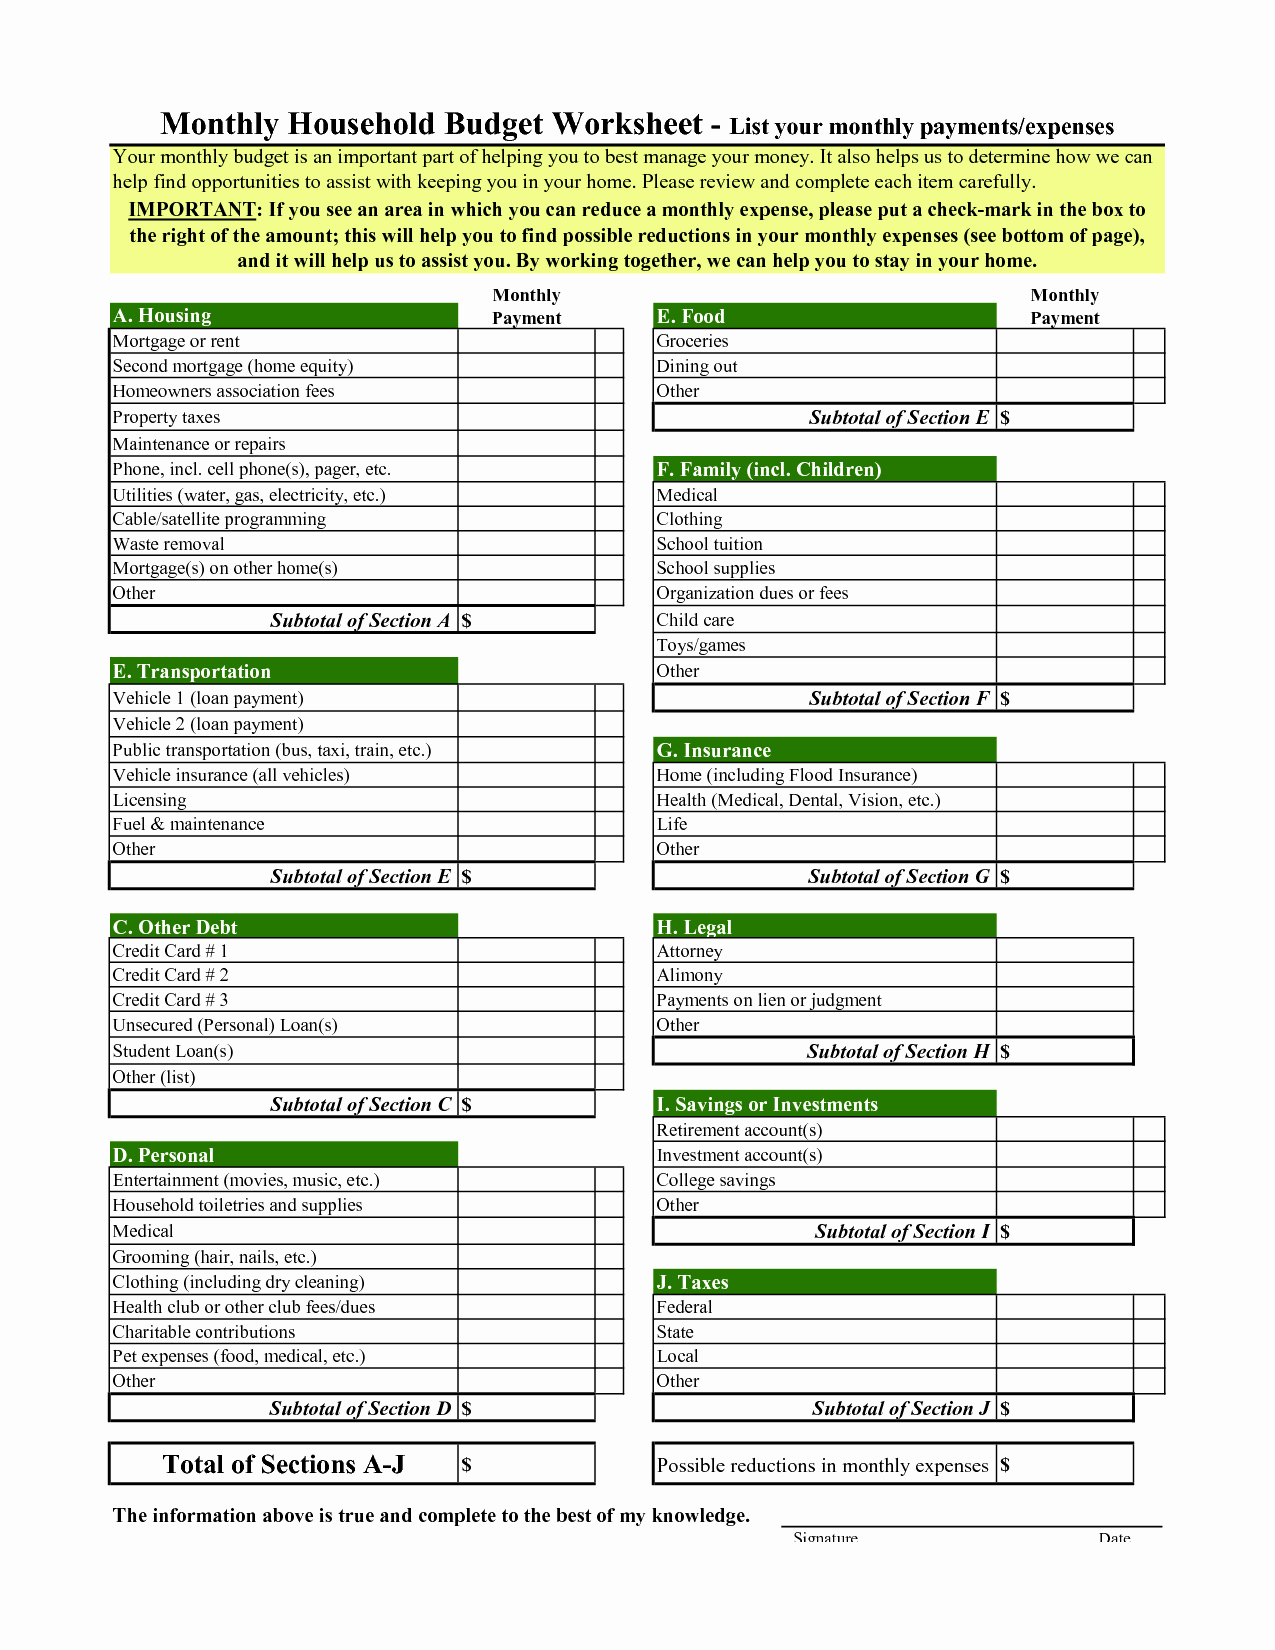 Landlord Excel Template Property Managementsheet Expenses Free and Landlord Spreadsheet Free